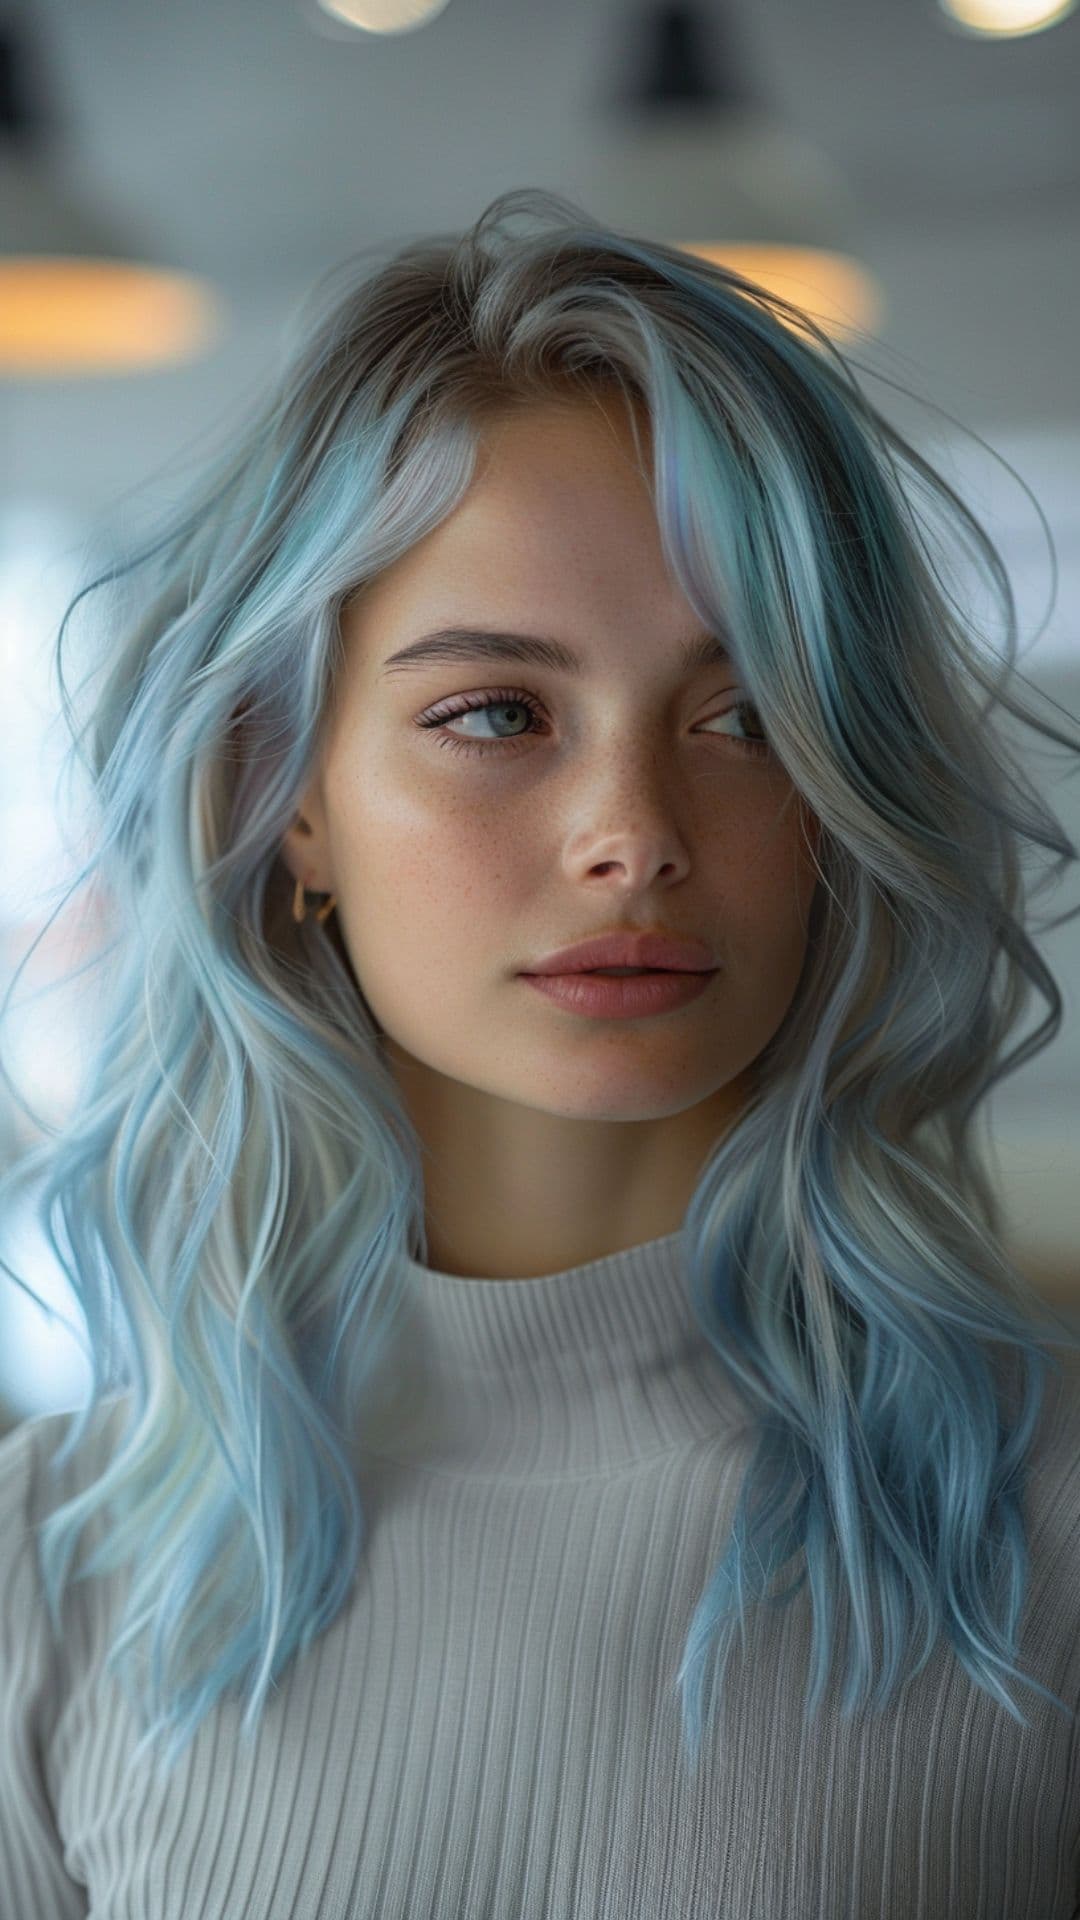 A woman modelling a silver and blue hair.